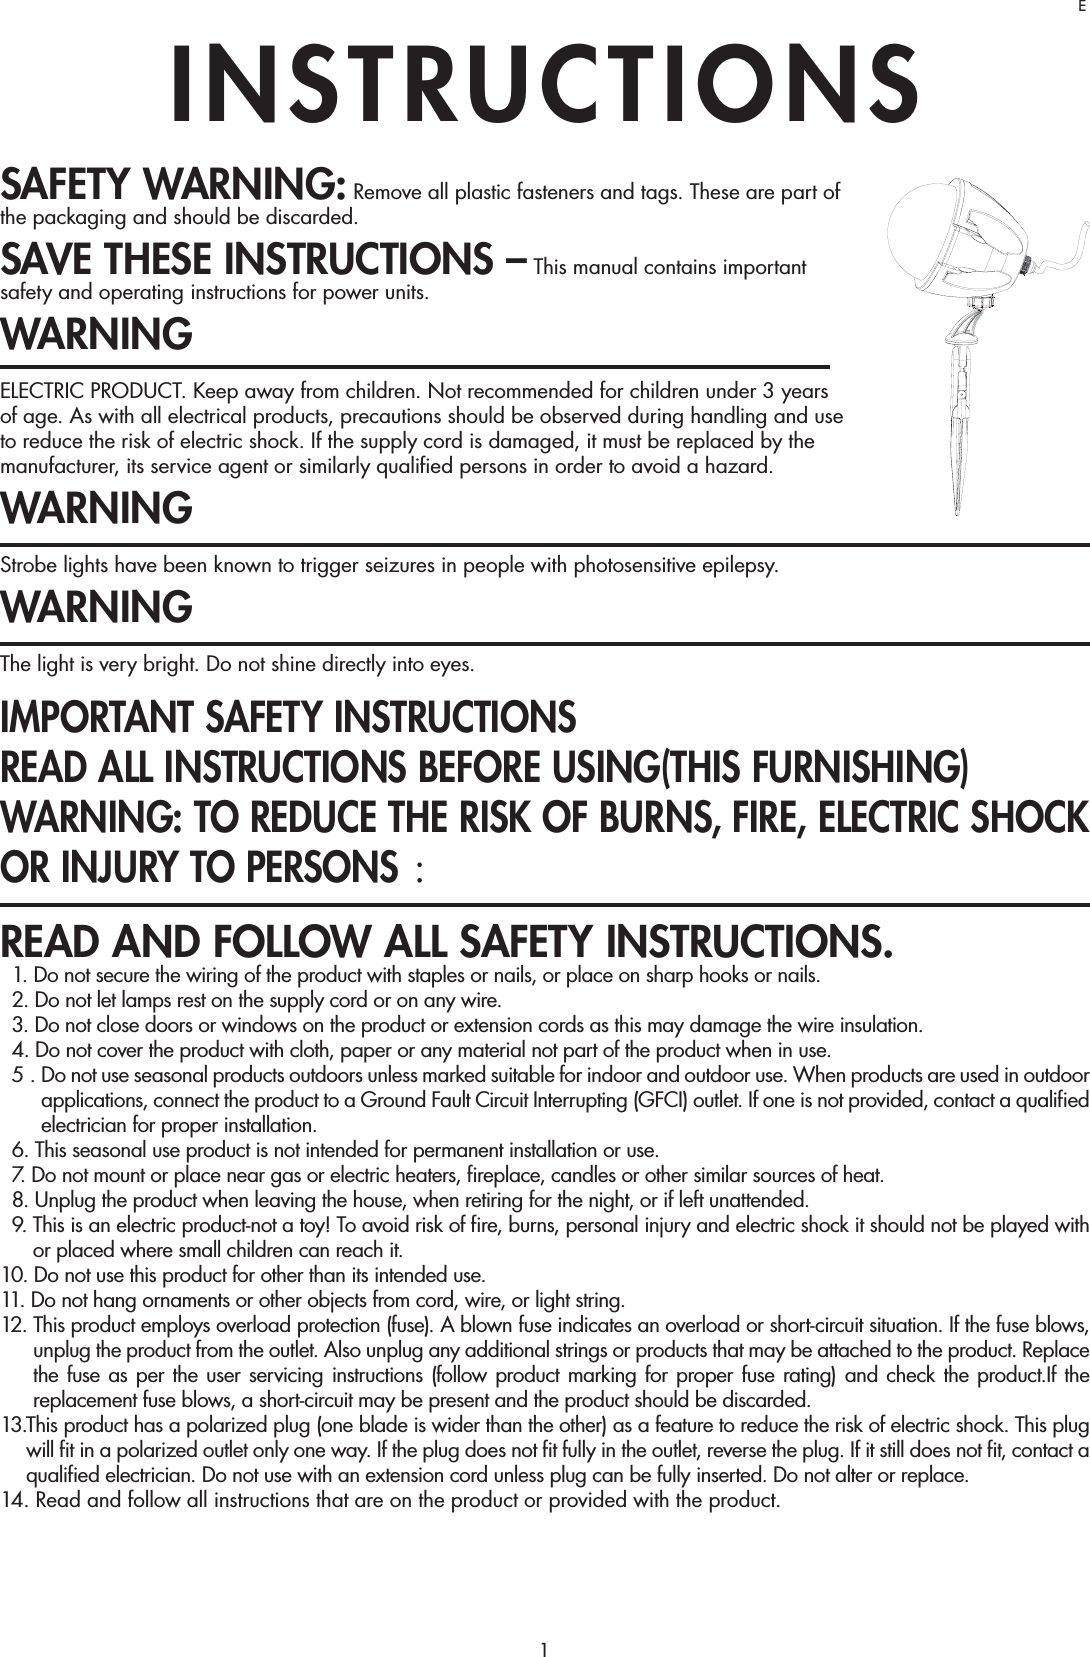 1SAFETY WARNING: Remove all plastic fasteners and tags. These are part of the packaging and should be discarded.SAVE THESE INSTRUCTIONS – This manual contains important safety and operating instructions for power units.WARNINGELECTRIC PRODUCT. Keep away from children. Not recommended for children under 3 years of age. As with all electrical products, precautions should be observed during handling and use to reduce the risk of electric shock. If the supply cord is damaged, it must be replaced by the manufacturer, its service agent or similarly qualiﬁed persons in order to avoid a hazard.WARNINGStrobe lights have been known to trigger seizures in people with photosensitive epilepsy.WARNINGThe light is very bright. Do not shine directly into eyes.IMPORTANT SAFETY INSTRUCTIONS READ ALL INSTRUCTIONS BEFORE USING(THIS FURNISHING)WARNING: TO REDUCE THE RISK OF BURNS, FIRE, ELECTRIC SHOCK OR INJURY TO PERSONS ： READ AND FOLLOW ALL SAFETY INSTRUCTIONS.  1. Do not secure the wiring of the product with staples or nails, or place on sharp hooks or nails.  2. Do not let lamps rest on the supply cord or on any wire.  3. Do not close doors or windows on the product or extension cords as this may damage the wire insulation.  4. Do not cover the product with cloth, paper or any material not part of the product when in use.  5 .  Do not use seasonal products outdoors unless marked suitable for indoor and outdoor use. When products are used in outdoor applications, connect the product to a Ground Fault Circuit Interrupting (GFCI) outlet. If one is not provided, contact a qualiﬁed electrician for proper installation.  6. This seasonal use product is not intended for permanent installation or use.  7. Do not mount or place near gas or electric heaters, ﬁreplace, candles or other similar sources of heat.  8. Unplug the product when leaving the house, when retiring for the night, or if left unattended.  9.  This is an electric product-not a toy! To avoid risk of ﬁre, burns, personal injury and electric shock it should not be played with or placed where small children can reach it.10. Do not use this product for other than its intended use.11. Do not hang ornaments or other objects from cord, wire, or light string.12.  This product employs overload protection (fuse). A blown fuse indicates an overload or short-circuit situation. If the fuse blows, unplug the product from the outlet. Also unplug any additional strings or products that may be attached to the product. Replace the fuse as per the user servicing instructions (follow product marking for proper fuse rating) and check the product.If the replacement fuse blows, a short-circuit may be present and the product should be discarded.13.  This product has a polarized plug (one blade is wider than the other) as a feature to reduce the risk of electric shock. This plug will ﬁt in a polarized outlet only one way. If the plug does not ﬁt fully in the outlet, reverse the plug. If it still does not ﬁt, contact a qualiﬁed electrician. Do not use with an extension cord unless plug can be fully inserted. Do not alter or replace.14.  Read and follow all instructions that are on the product or provided with the product.INSTRUCTIONSE